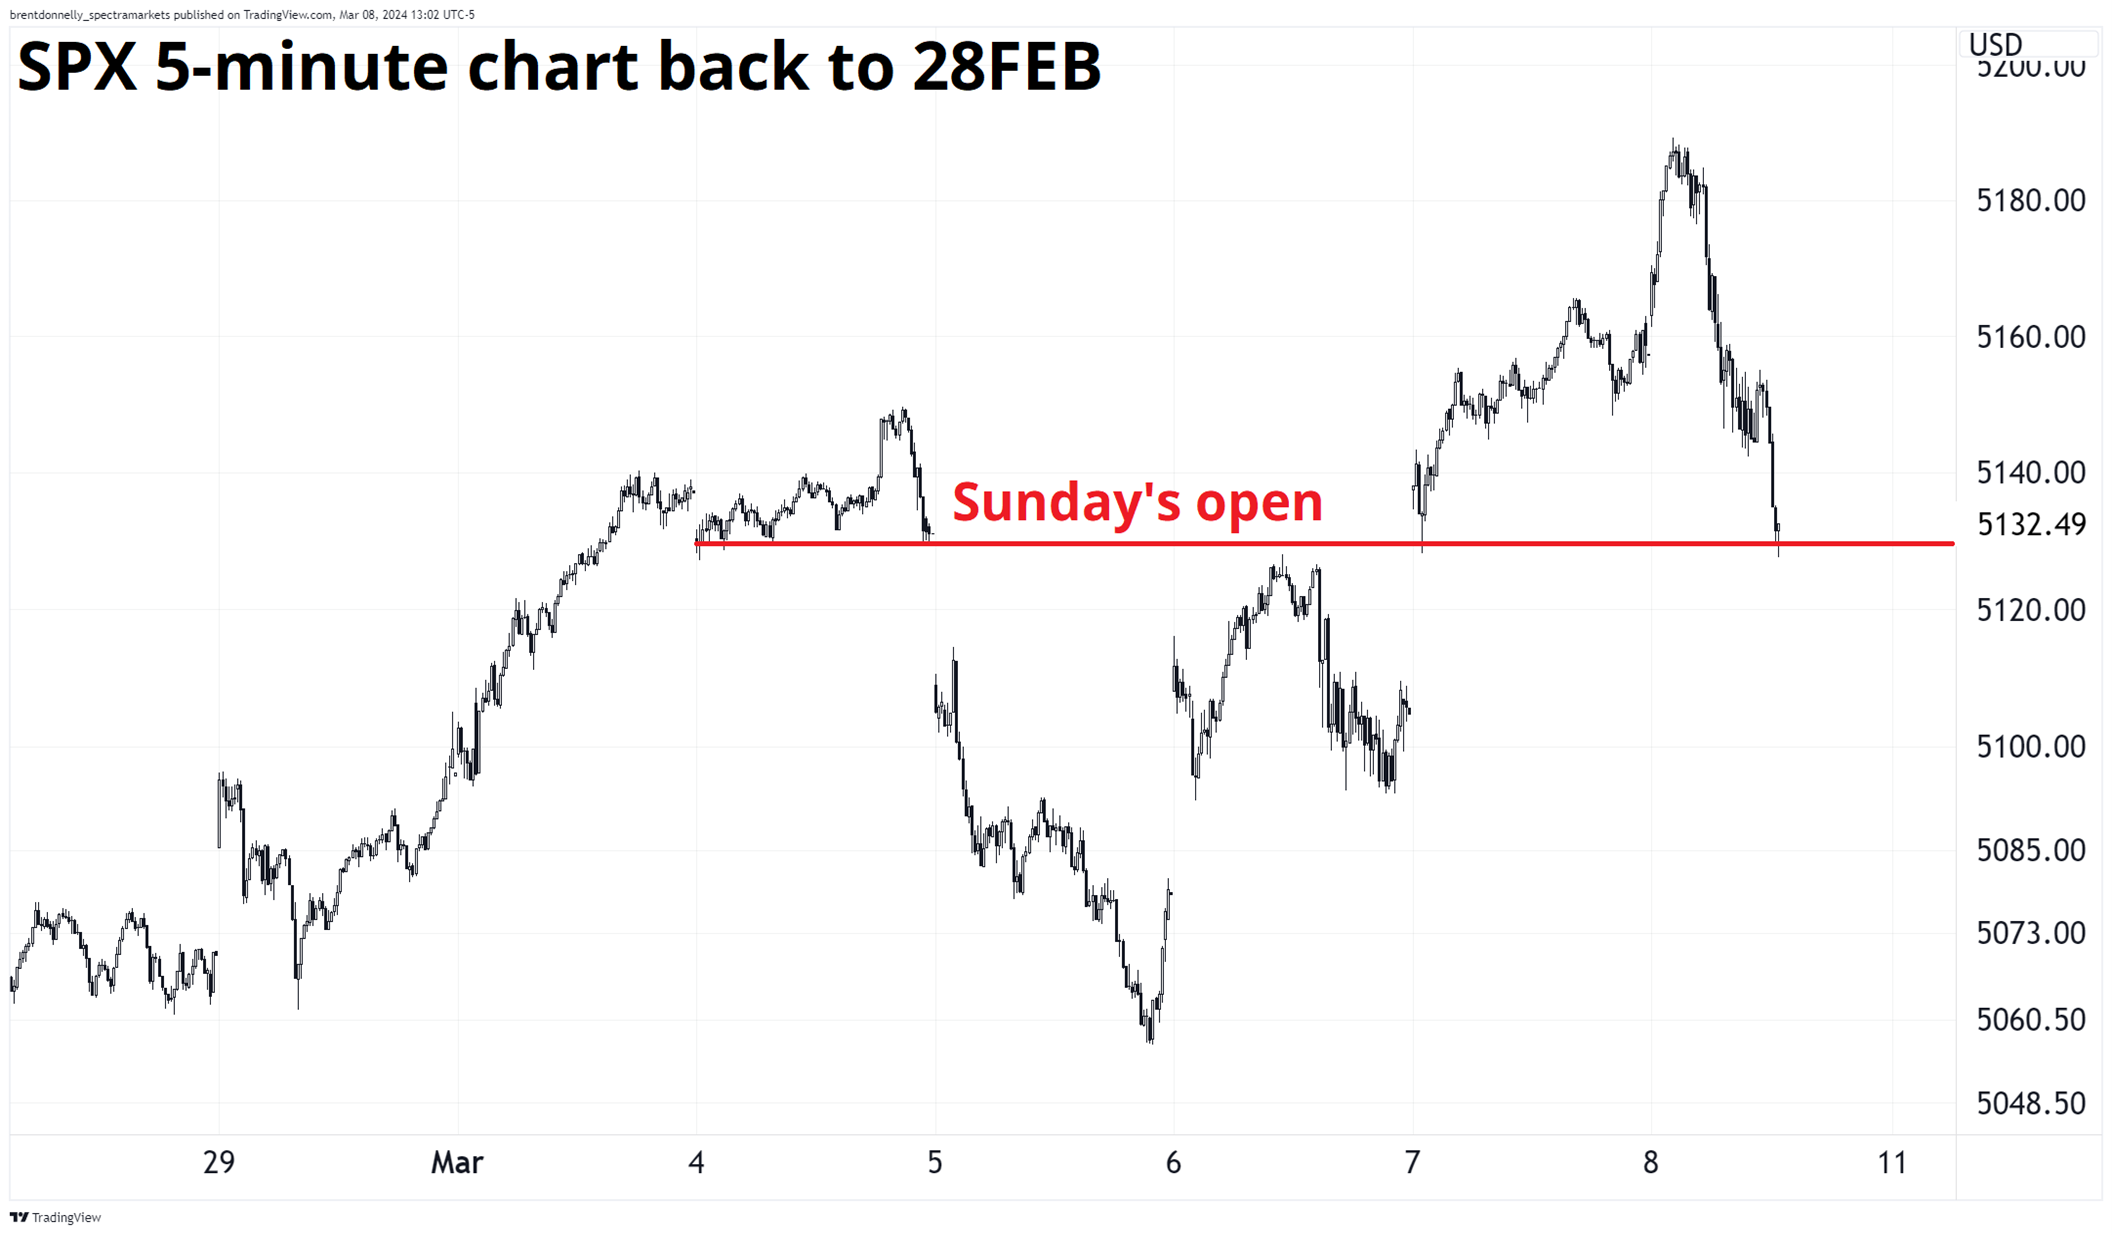 SPX 5-minute chart back to 28 February